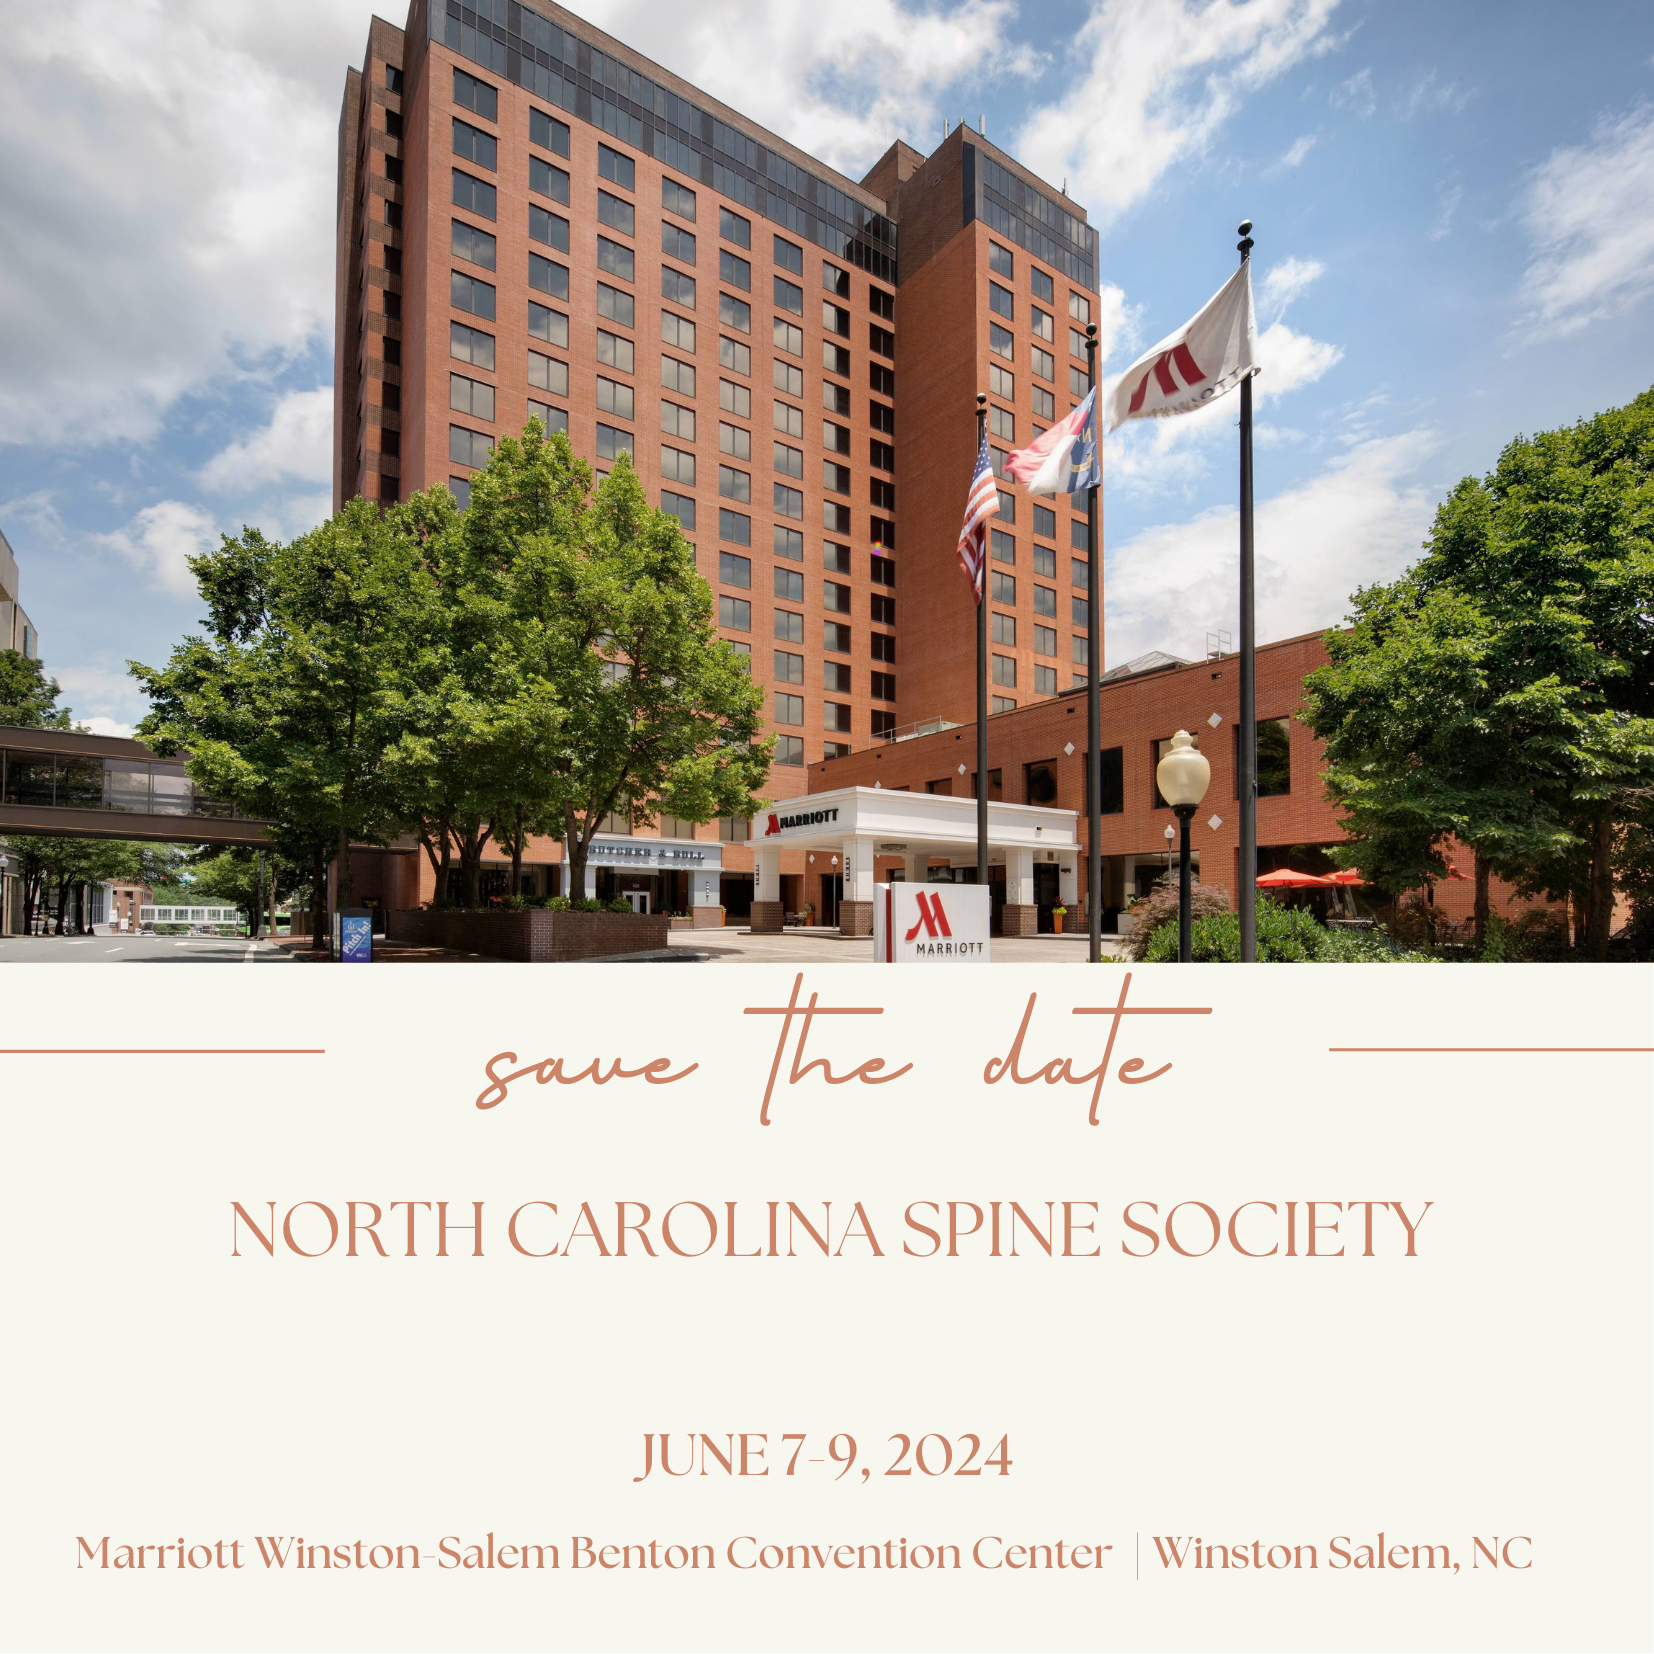 Save the Date for the 2024 NC Spine Society Annual Meeting - June 7-9 in Winston-Salem